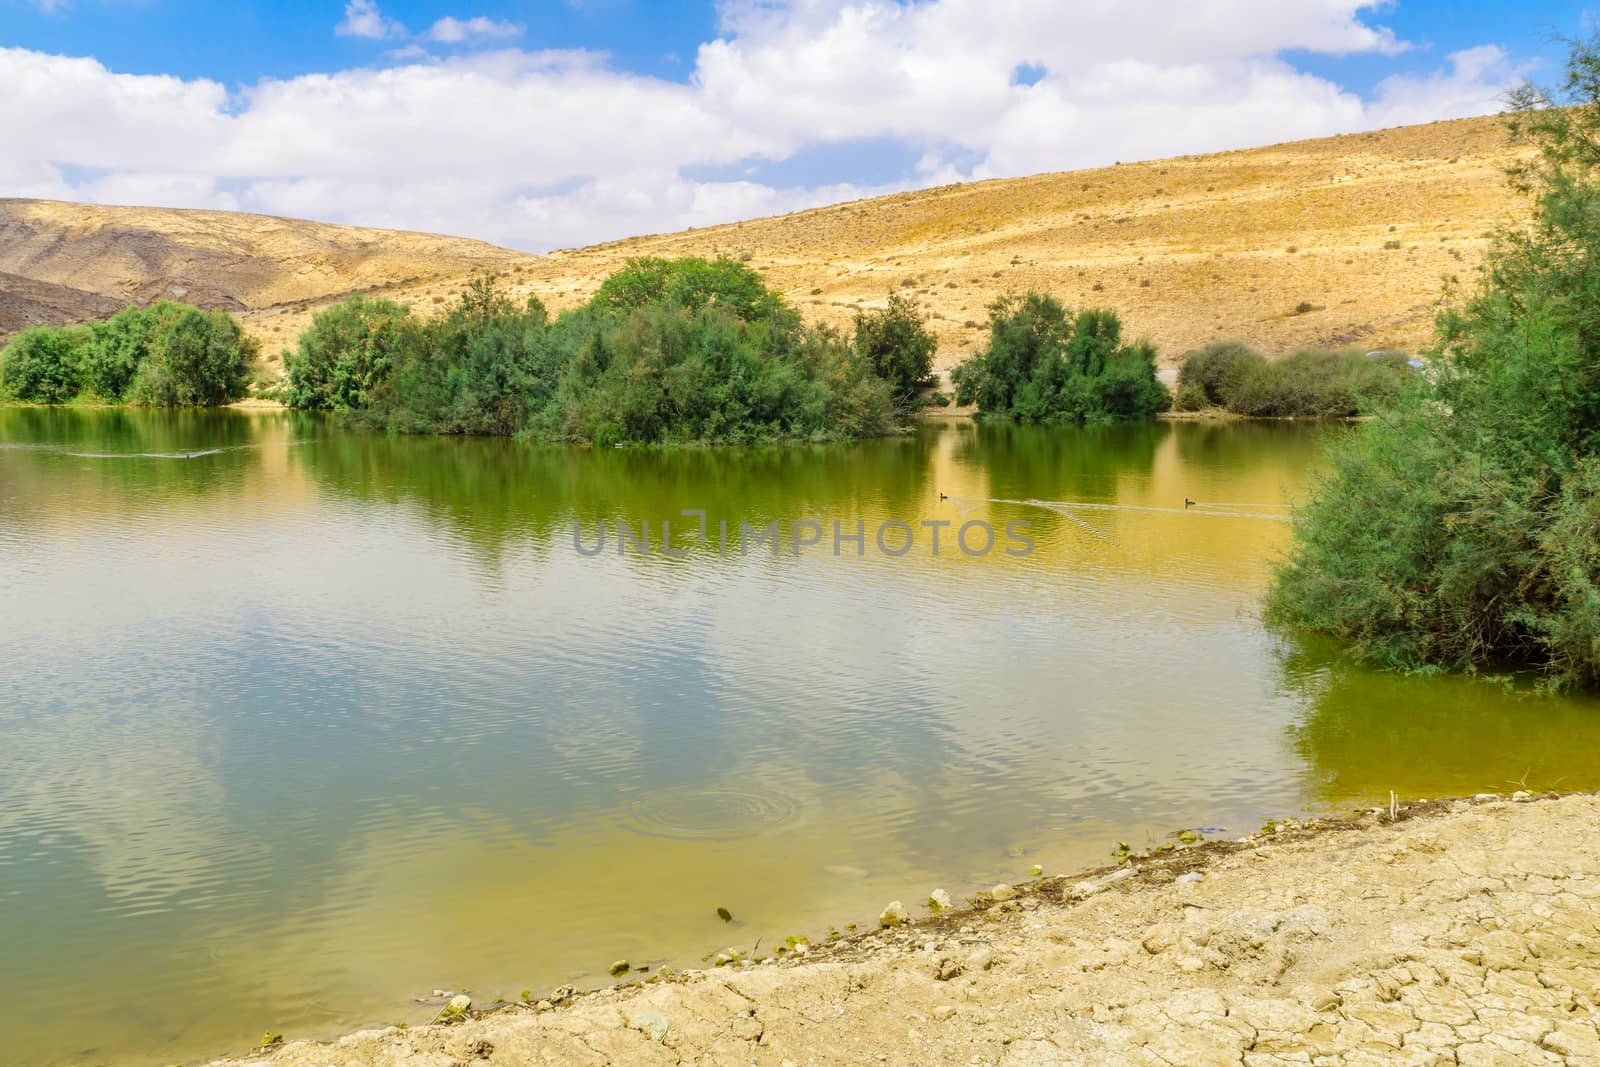 View of Yeruham Park and Lake, a manmade lake in the middle of the Negev Desert, Southern Israel